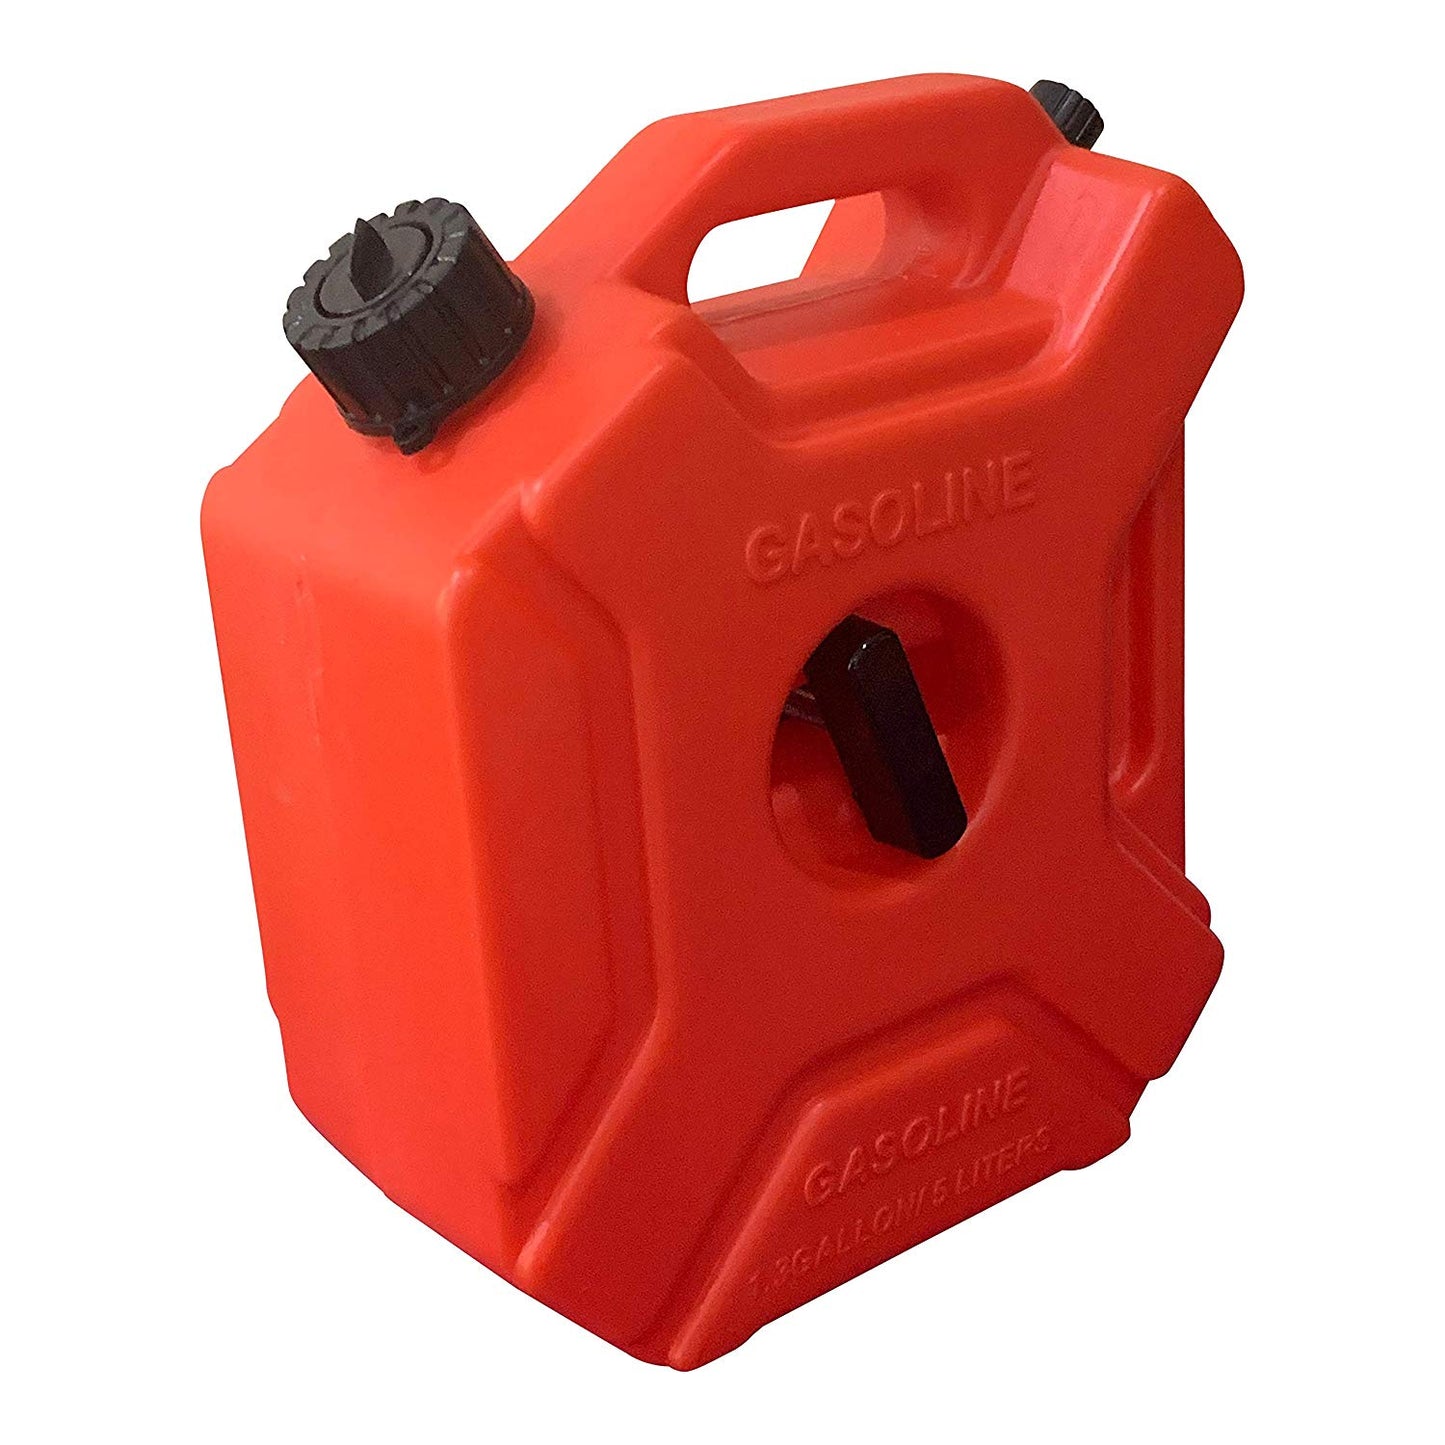 1.3 Gallon Gas Can with Car Mount and Two Spout (Black and White) - Red (5 L) 34.99 freeshipping - Kool Products